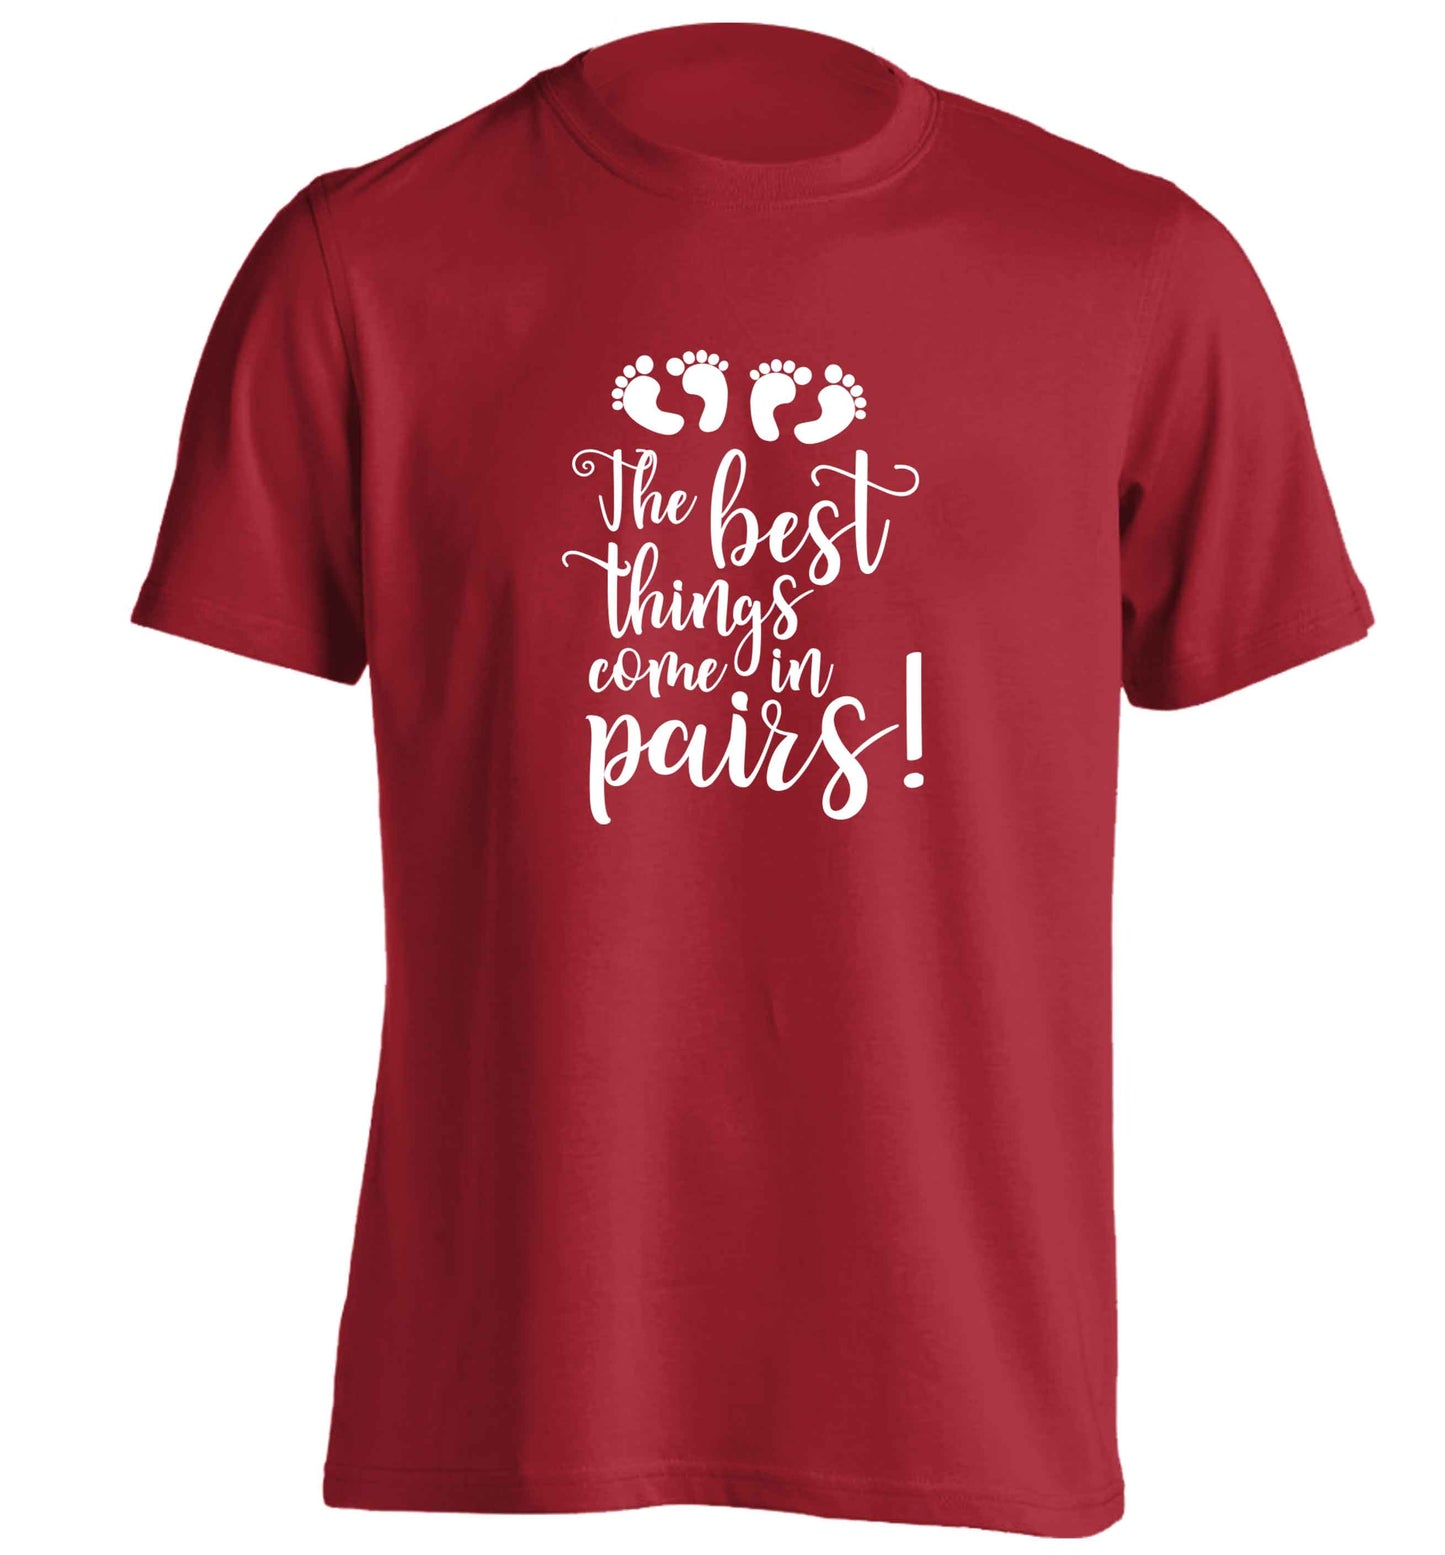 The best things come in pairs! adults unisex red Tshirt 2XL